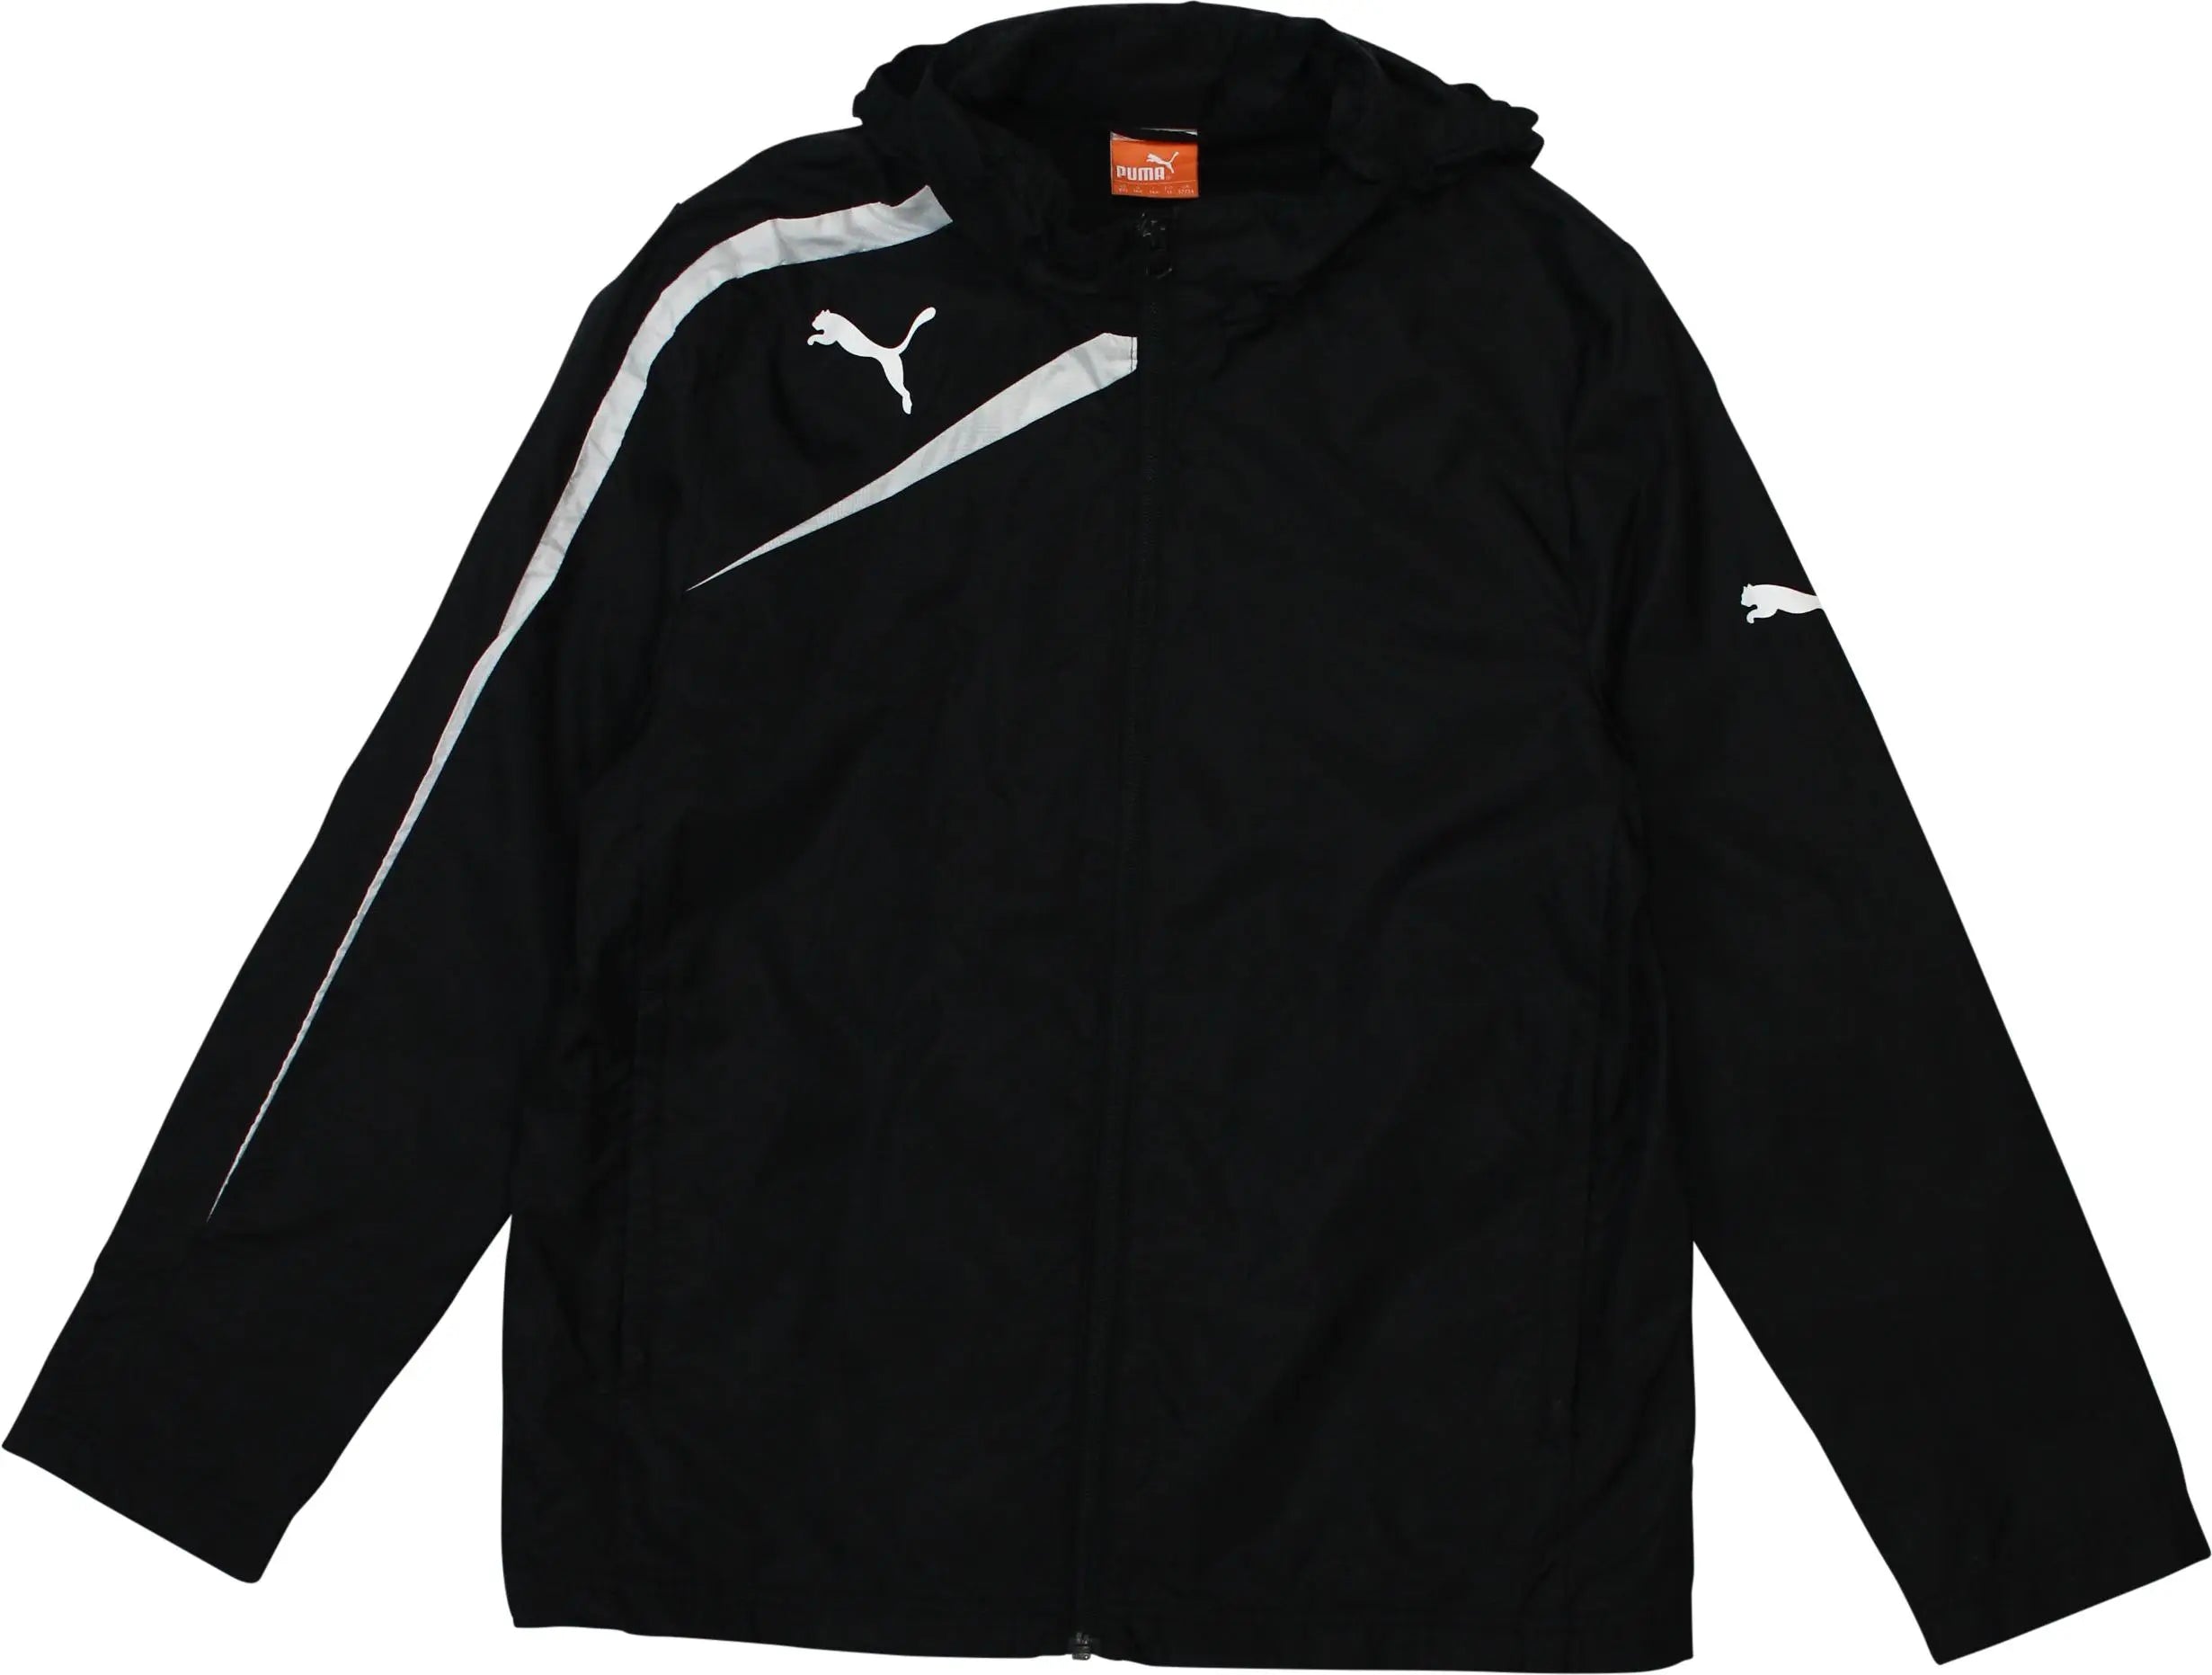 Puma - Black Windbreaker by Puma- ThriftTale.com - Vintage and second handclothing